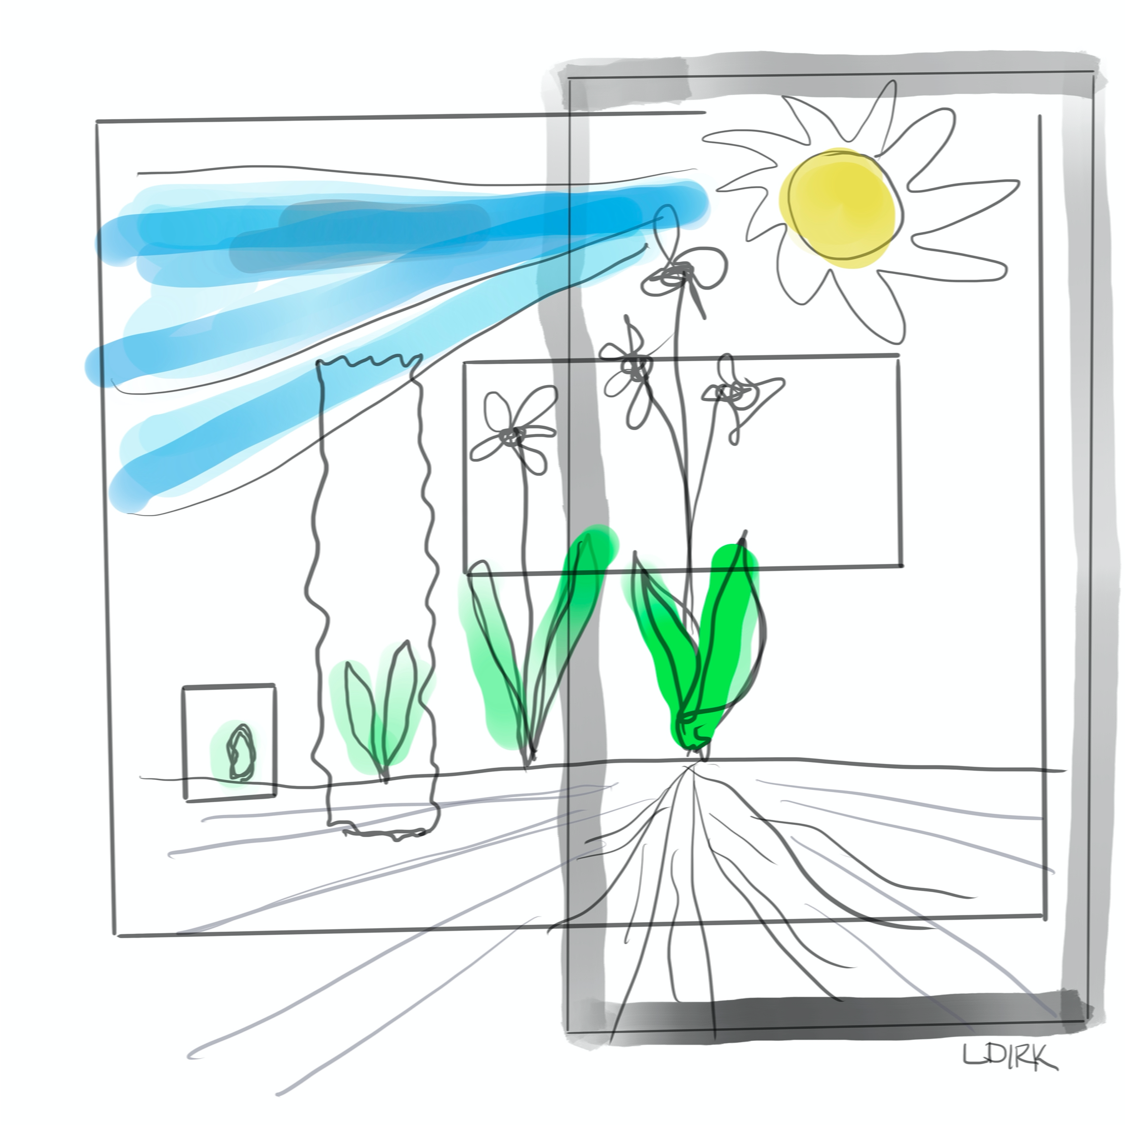 Illustration of sun, sky, and flowers with different boxes around sections of the illustration to represent the different frames we see things through